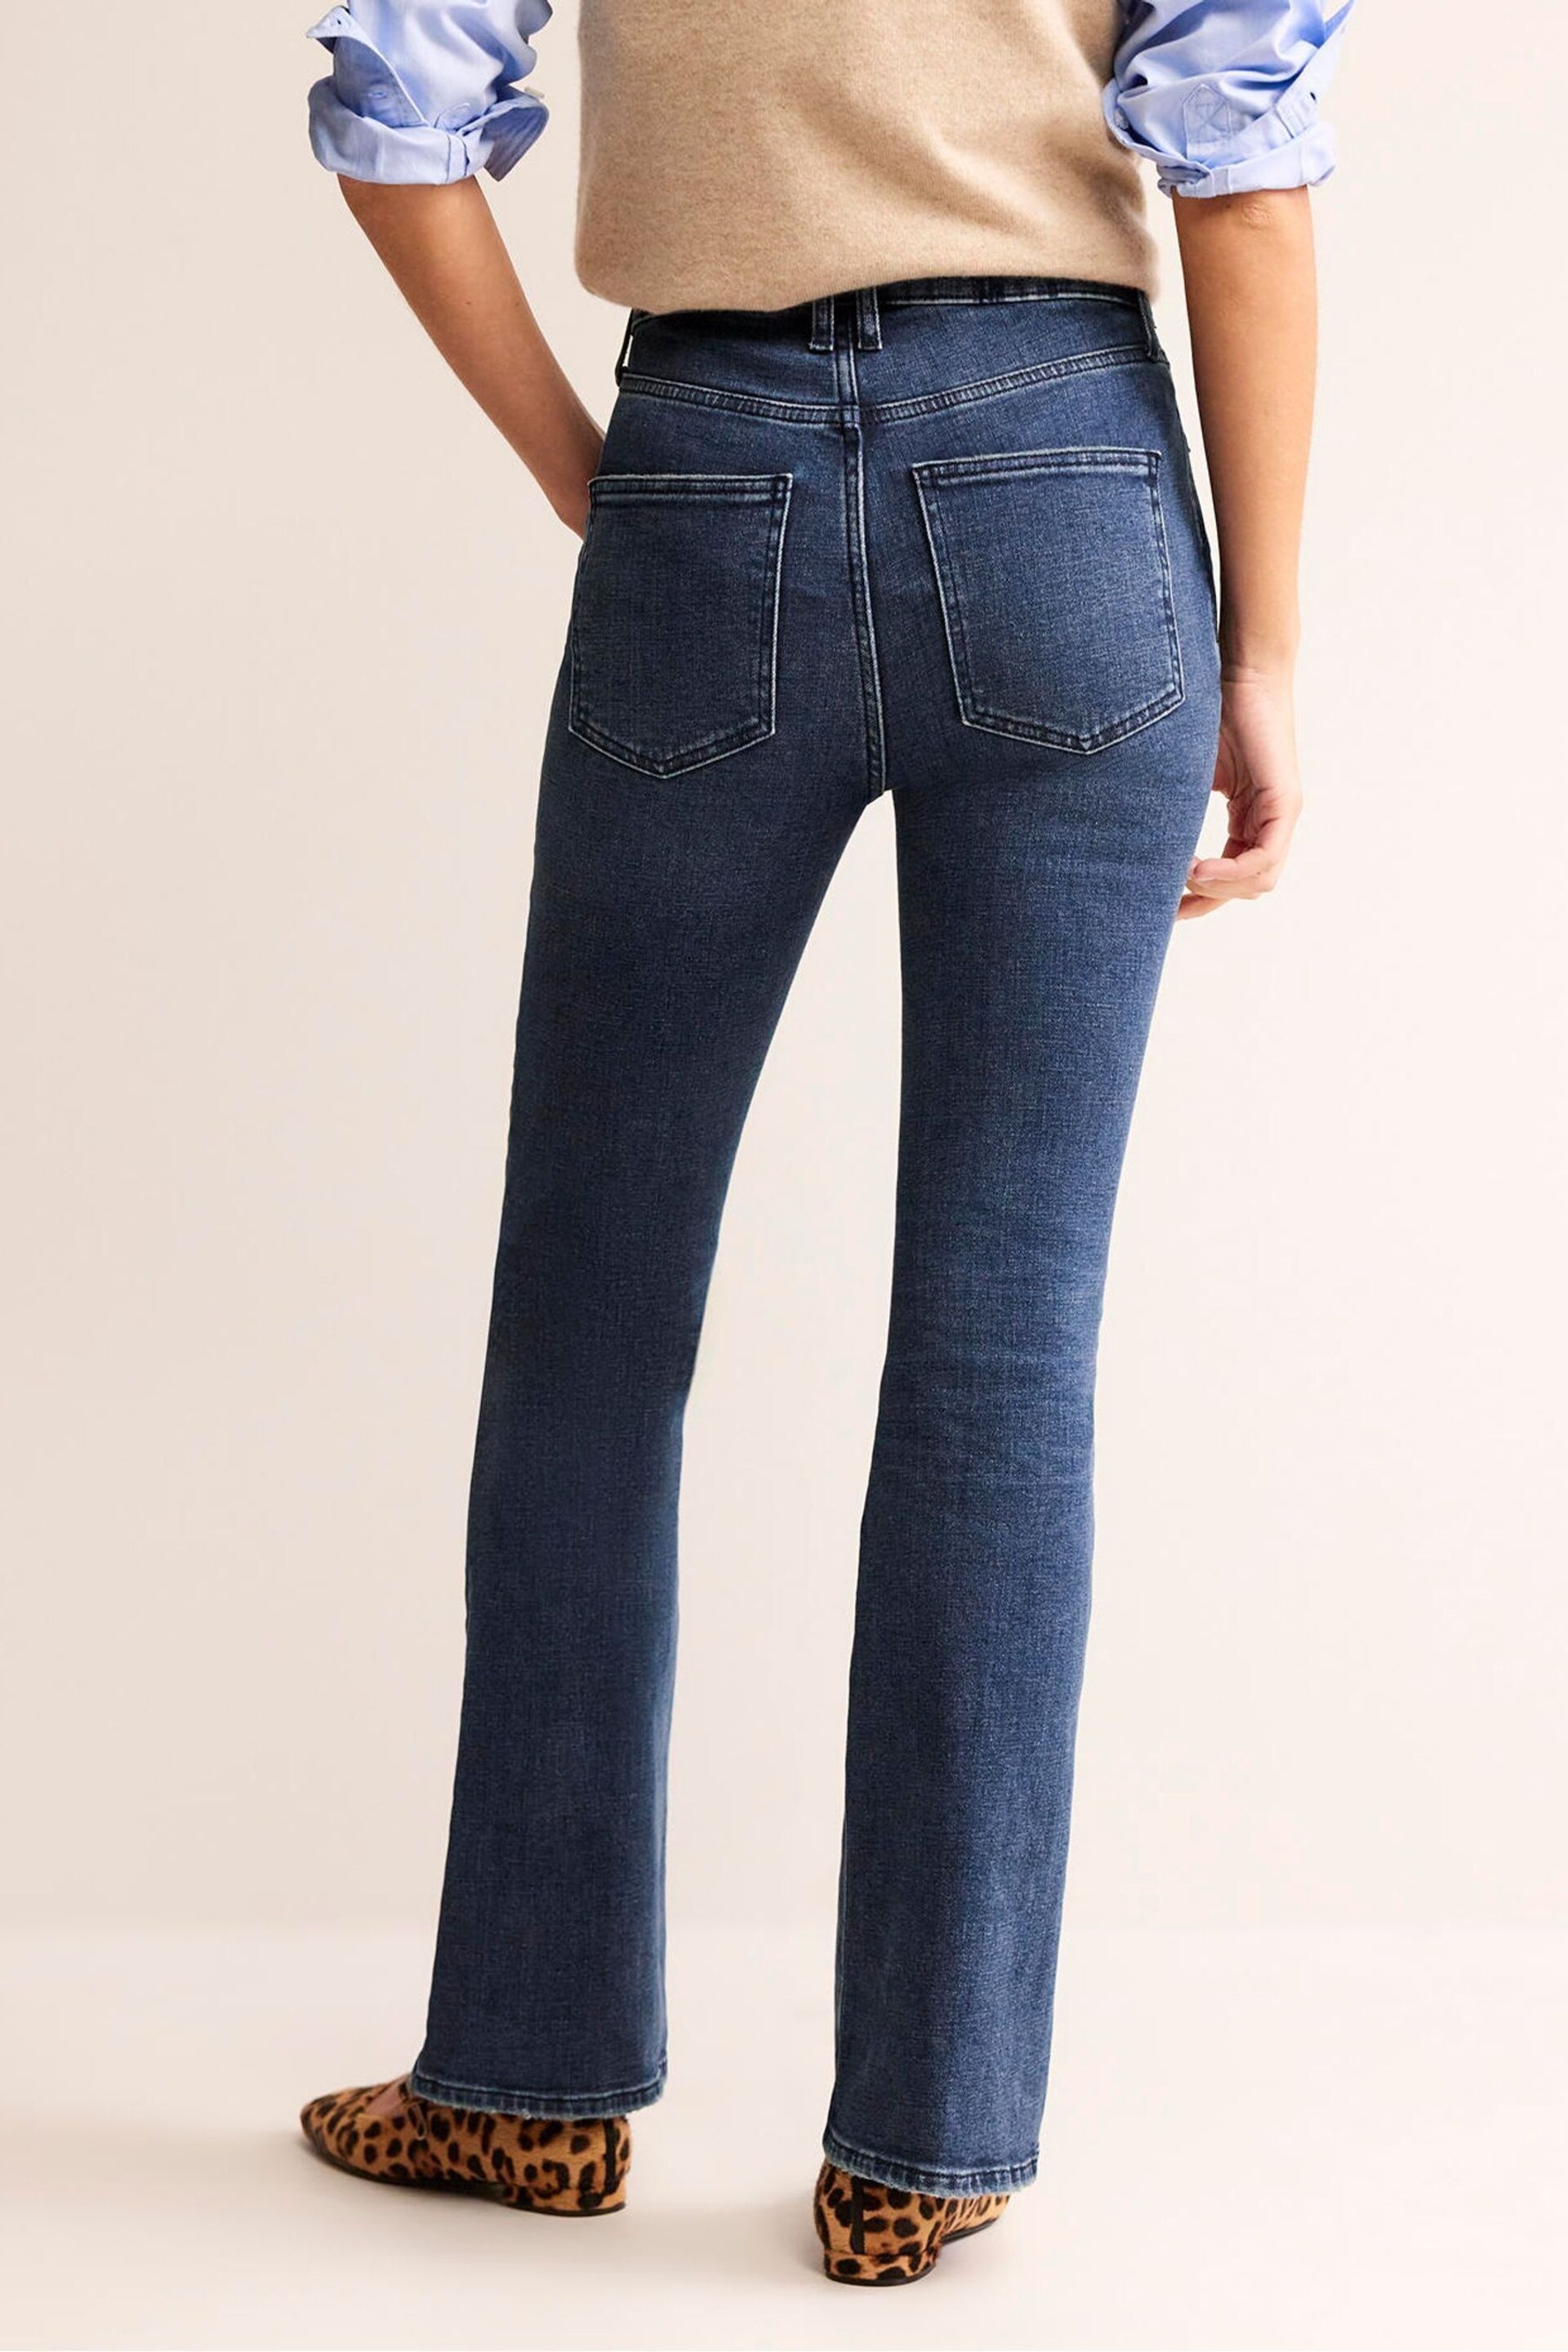 Boden Blue Mid Rise Slim Flare Jeans - Image 2 of 6